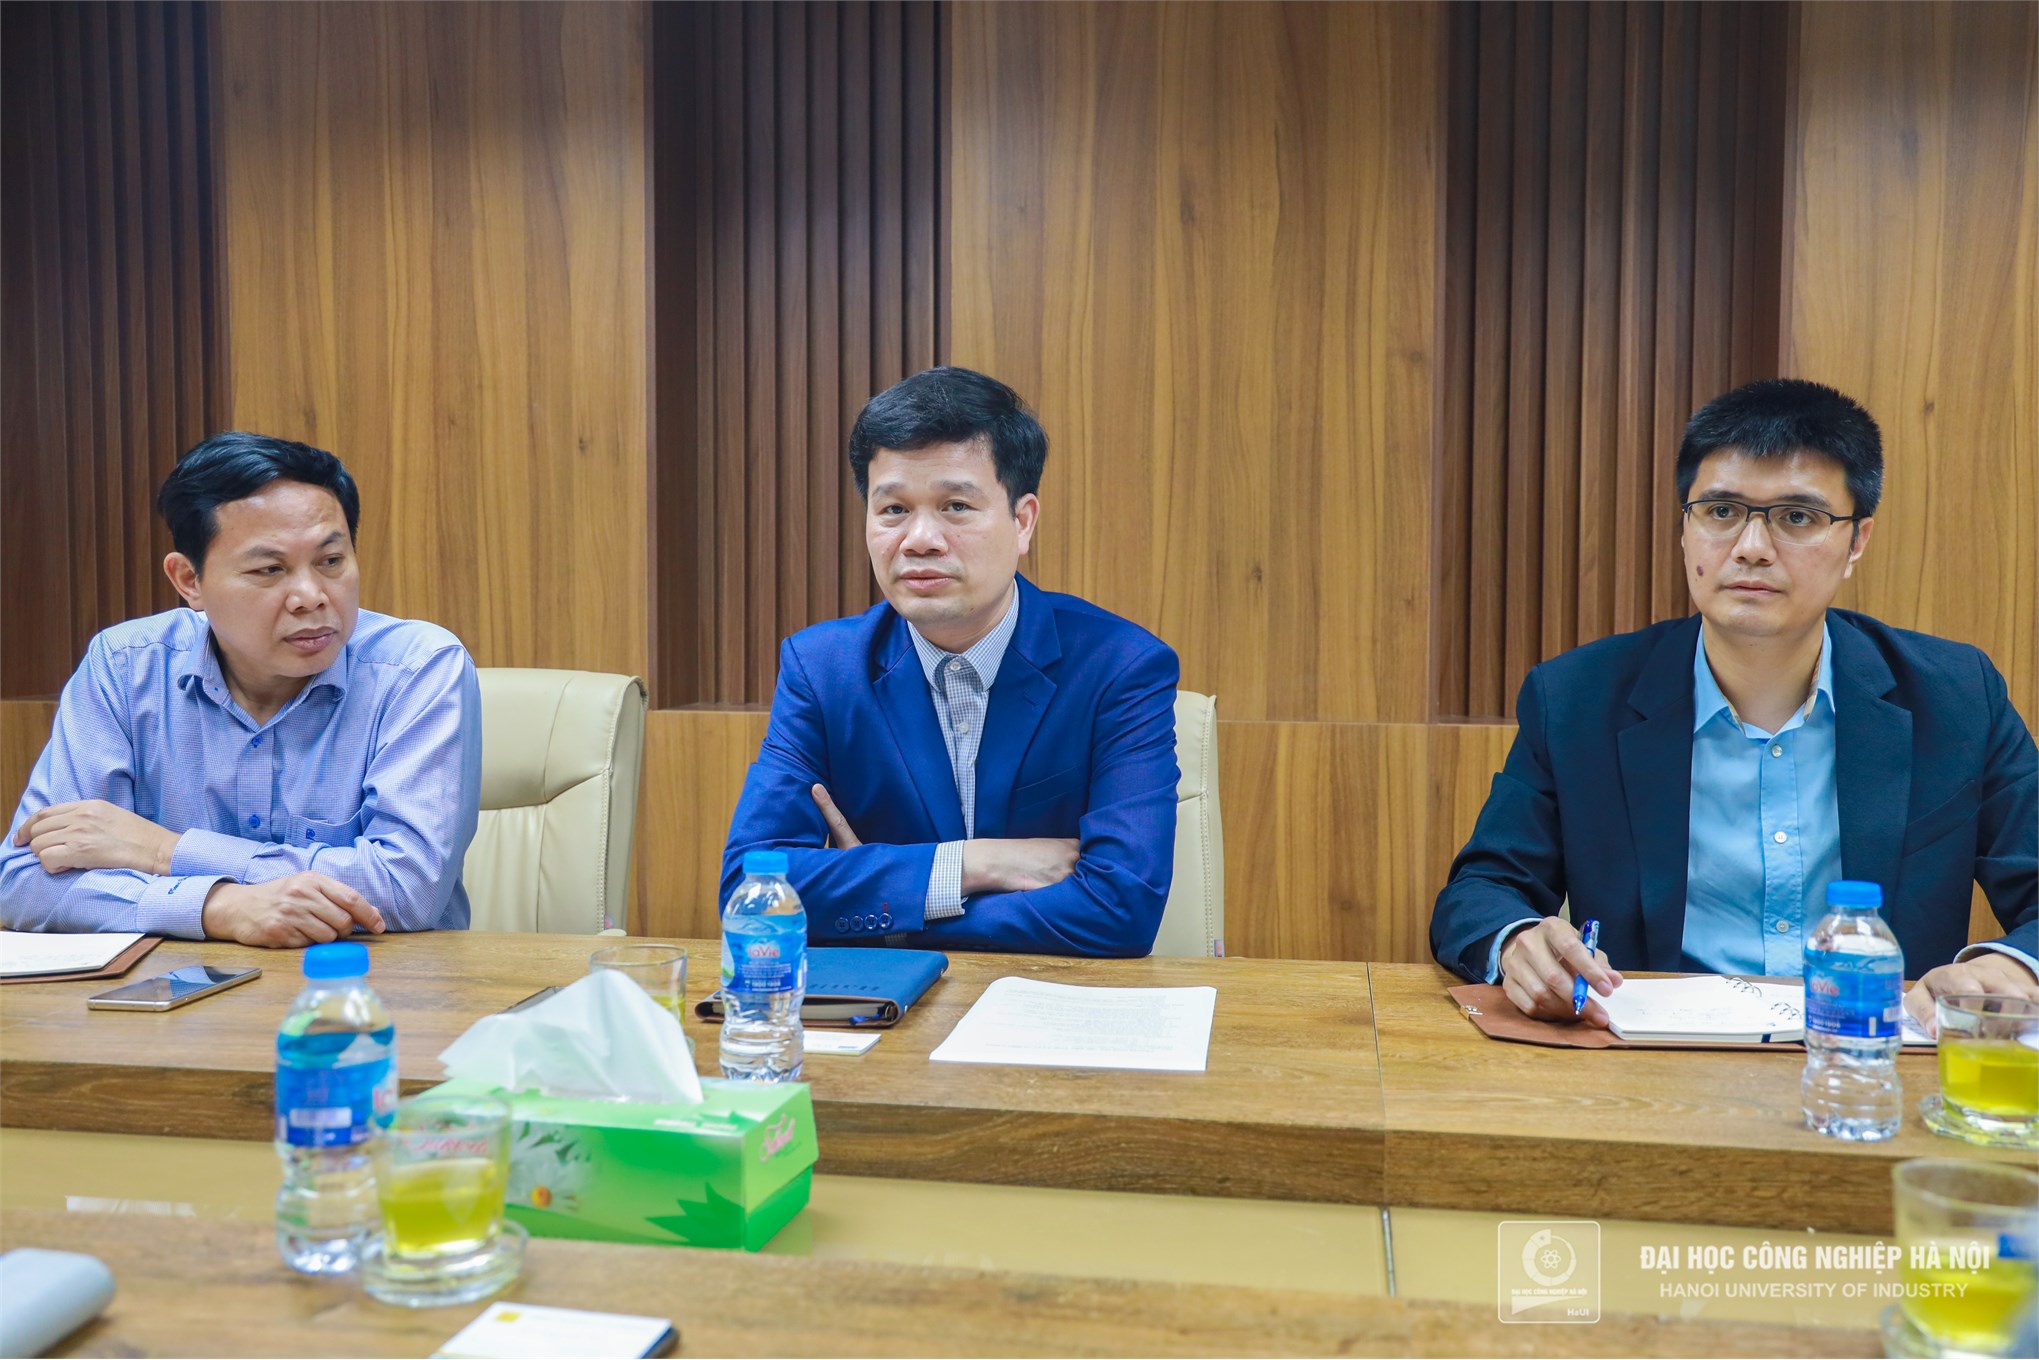 Hanoi University of Industry cooperates with Nissan Automotive Technology Vietnam in training high-quality human resources